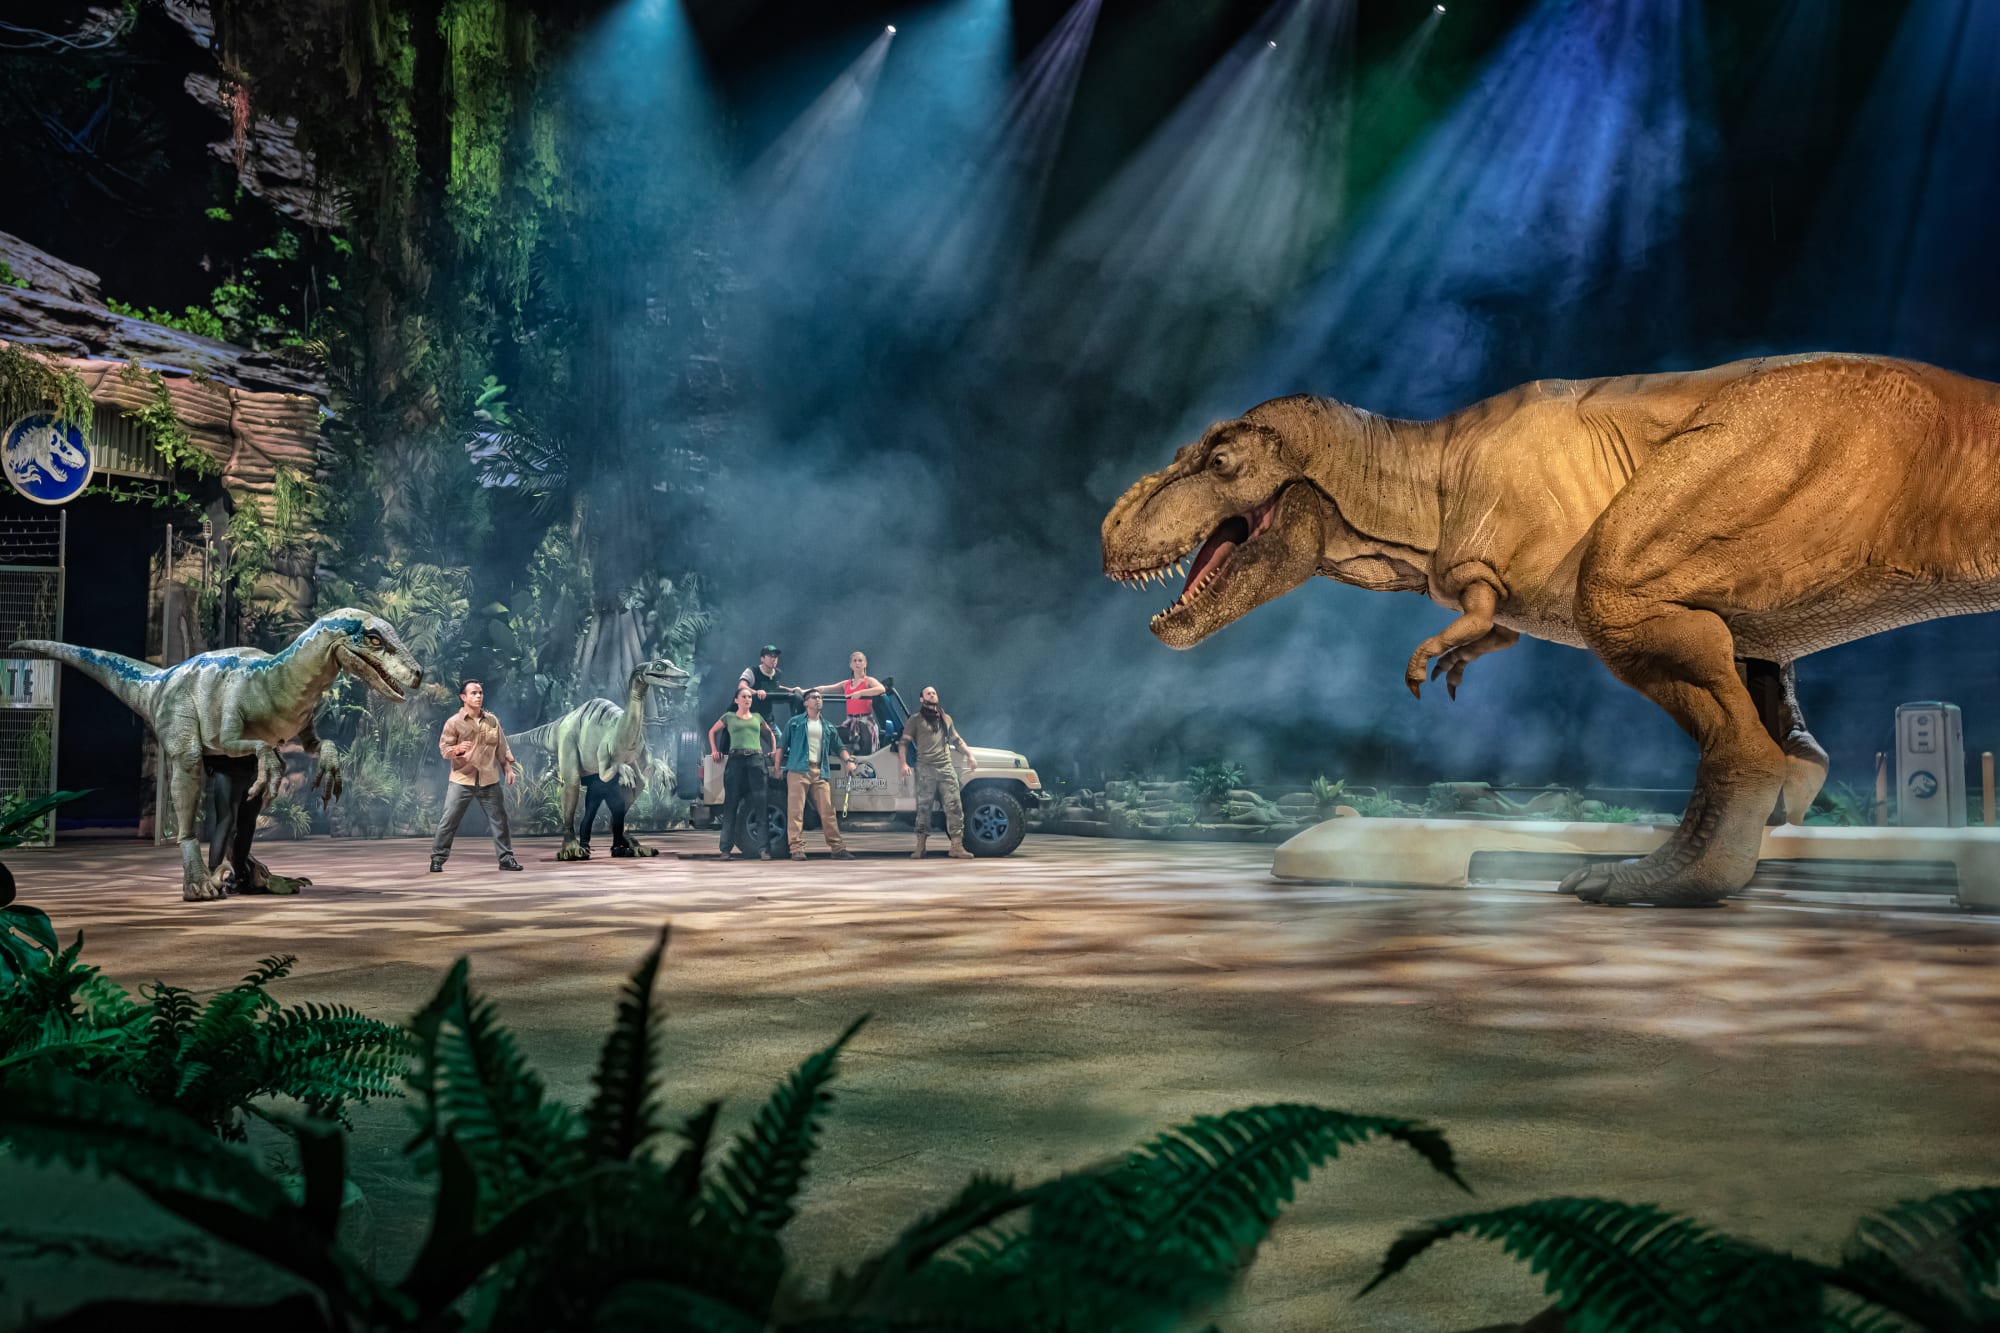 Jurassic World Live Tour is a spectacle that brings the magic of the